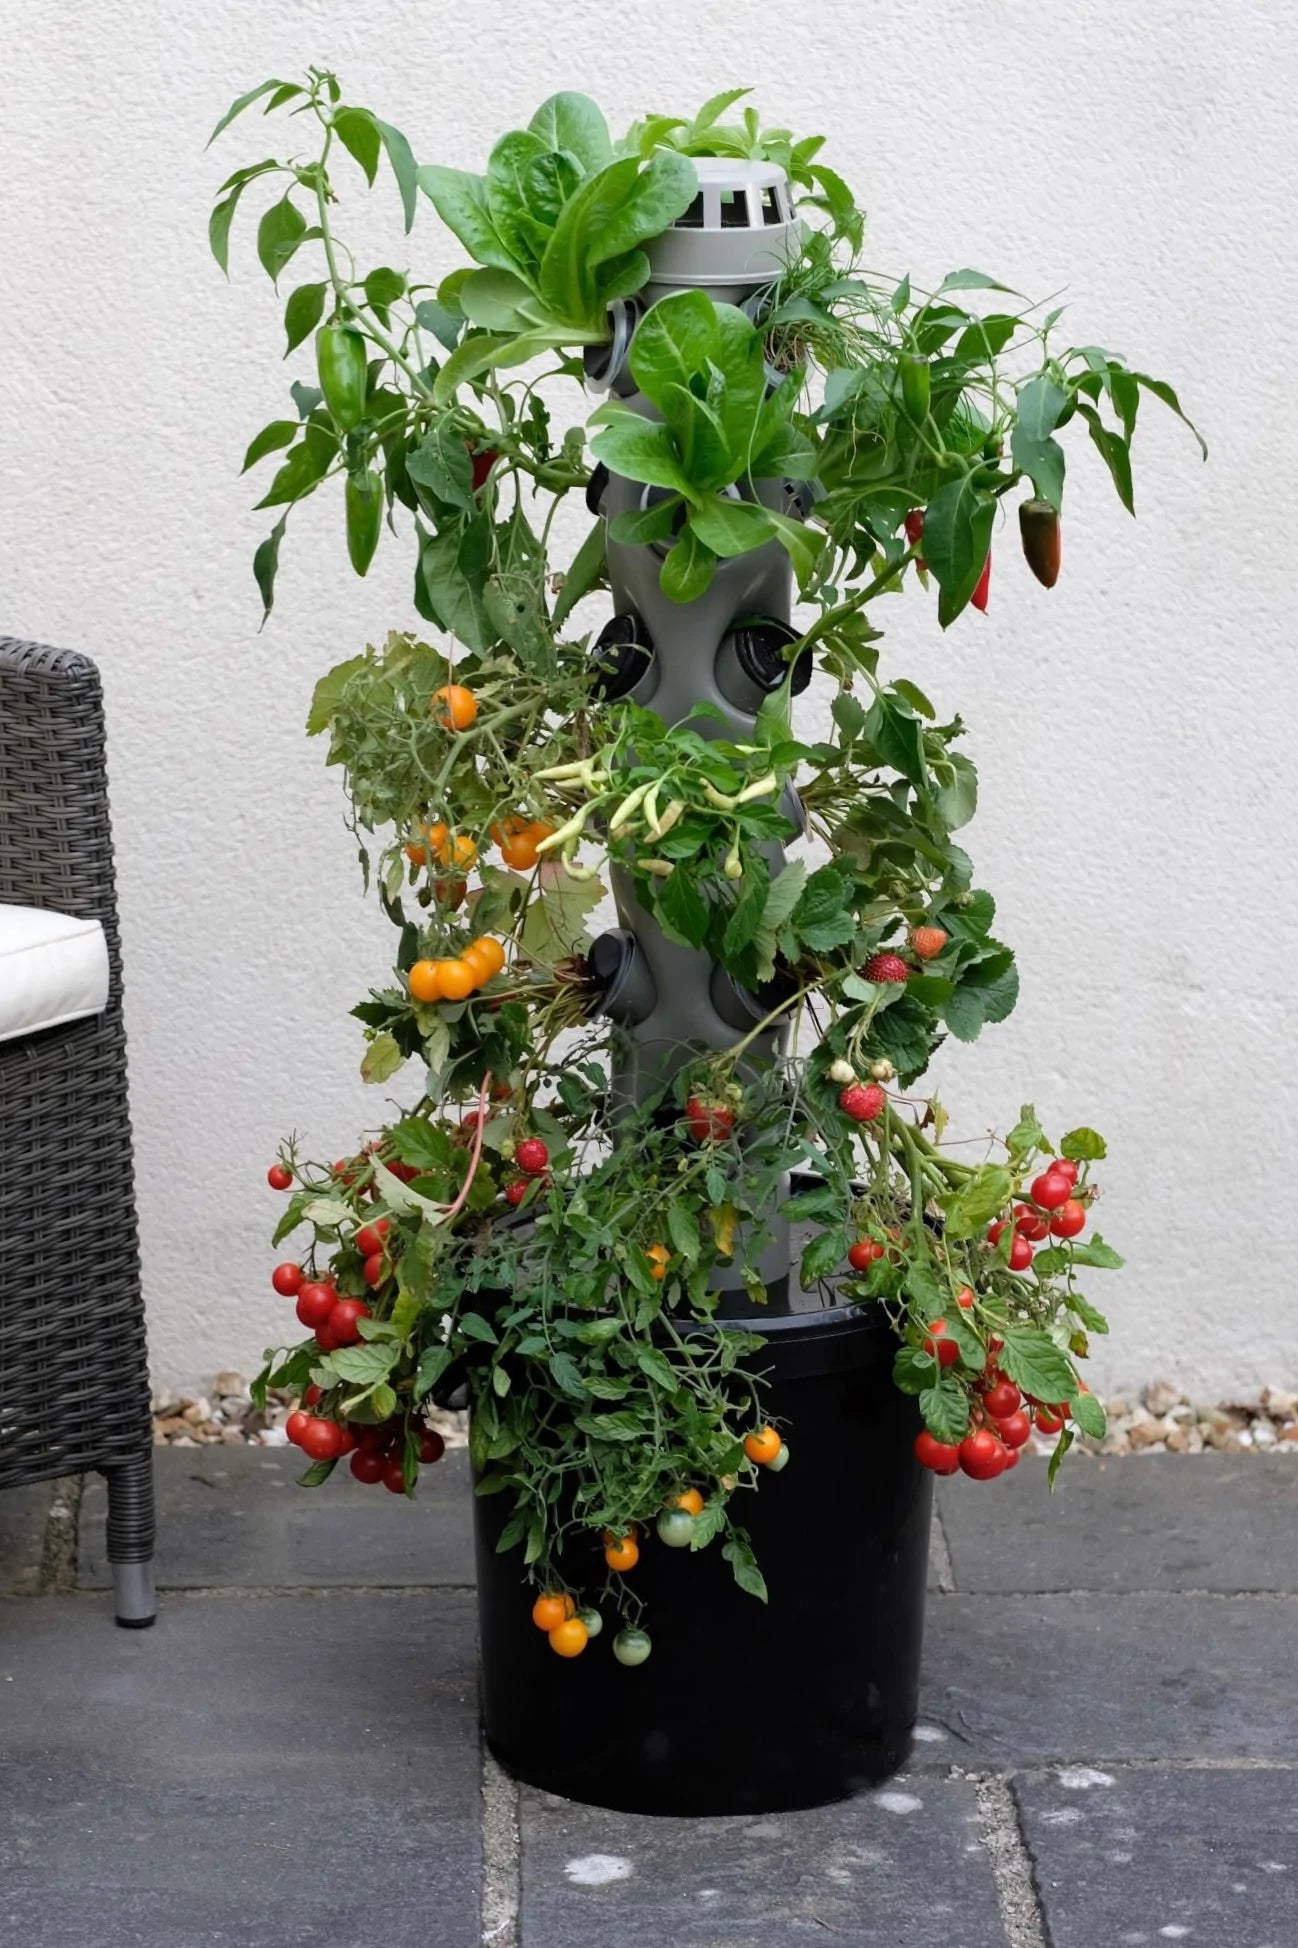 Vertical Hydroponic Tower Self-Watering Growing System (for 18 plants, choice of colours) Vertical Horizon Hydroponics